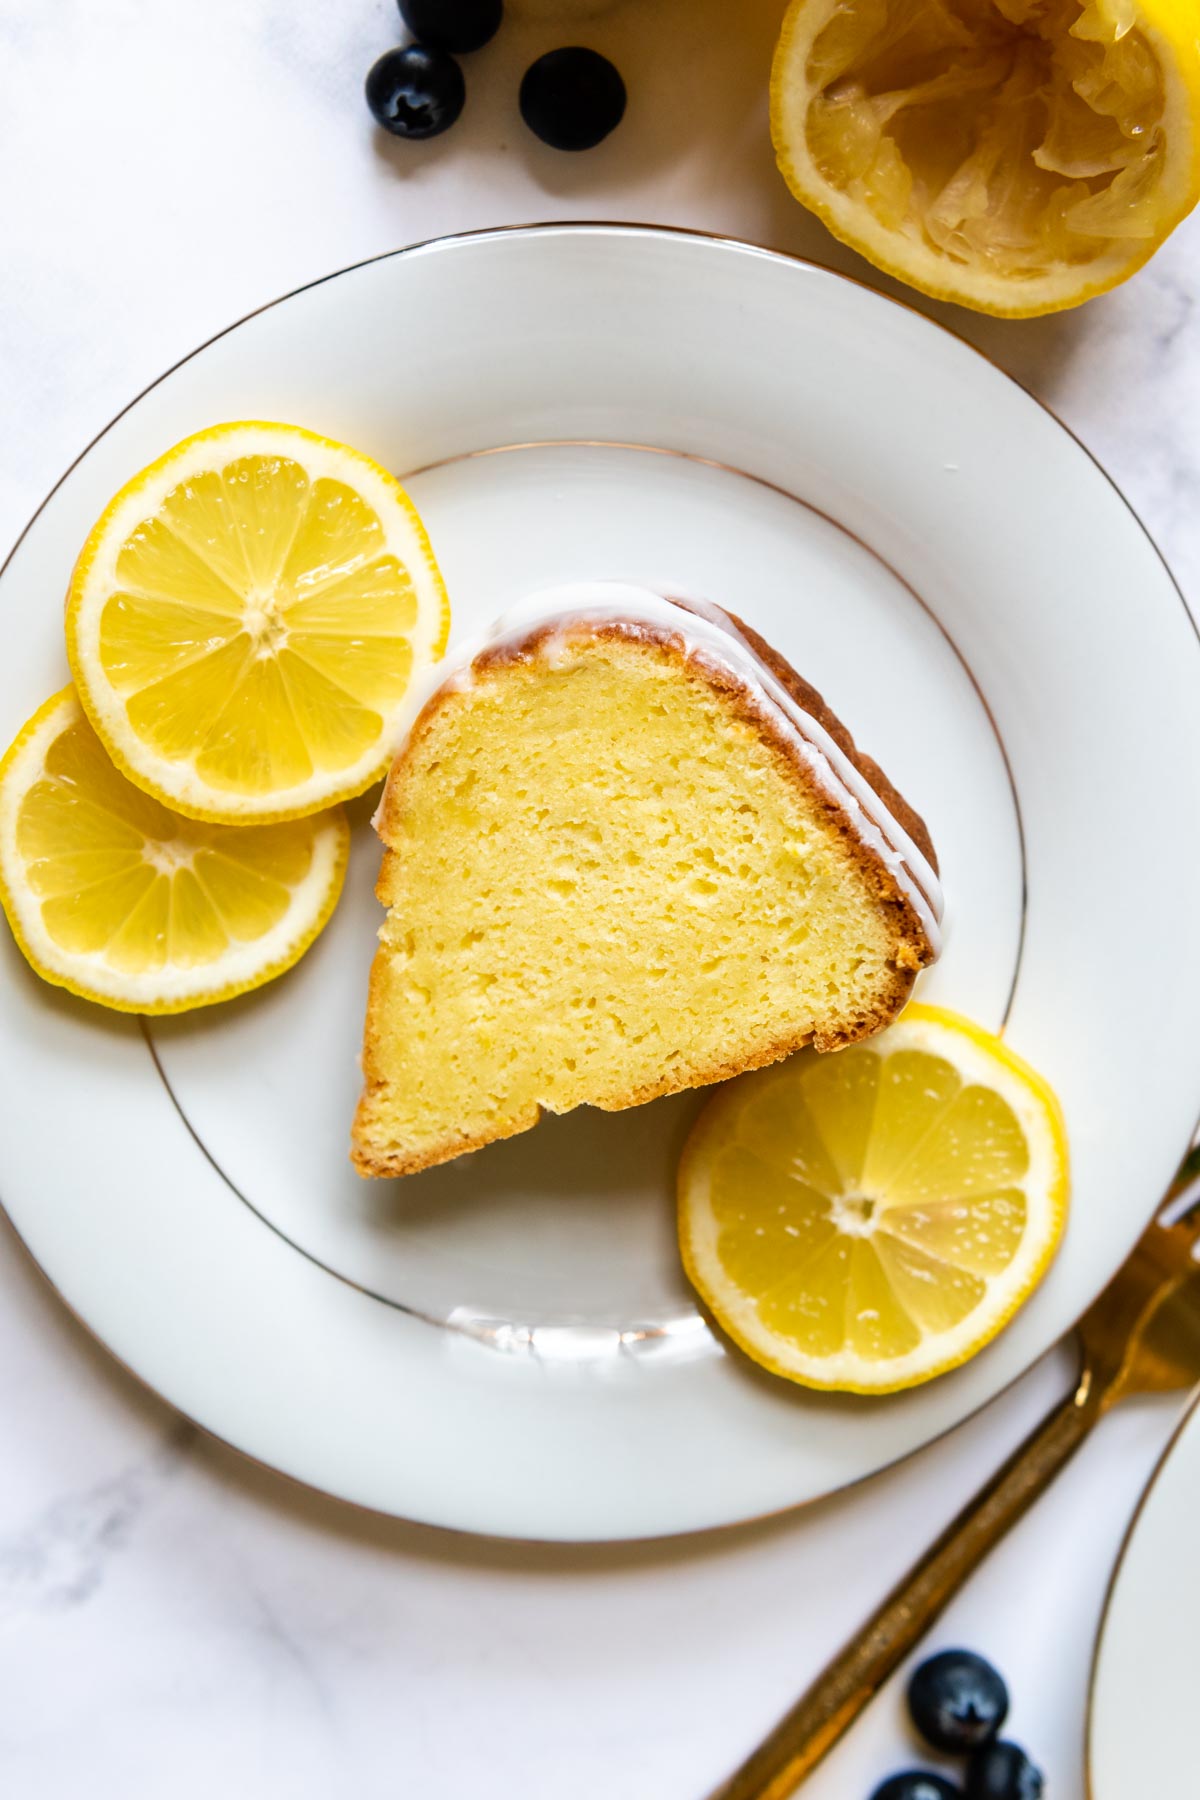 a slice of lemon cake on a white plate with lemon slices next to it.